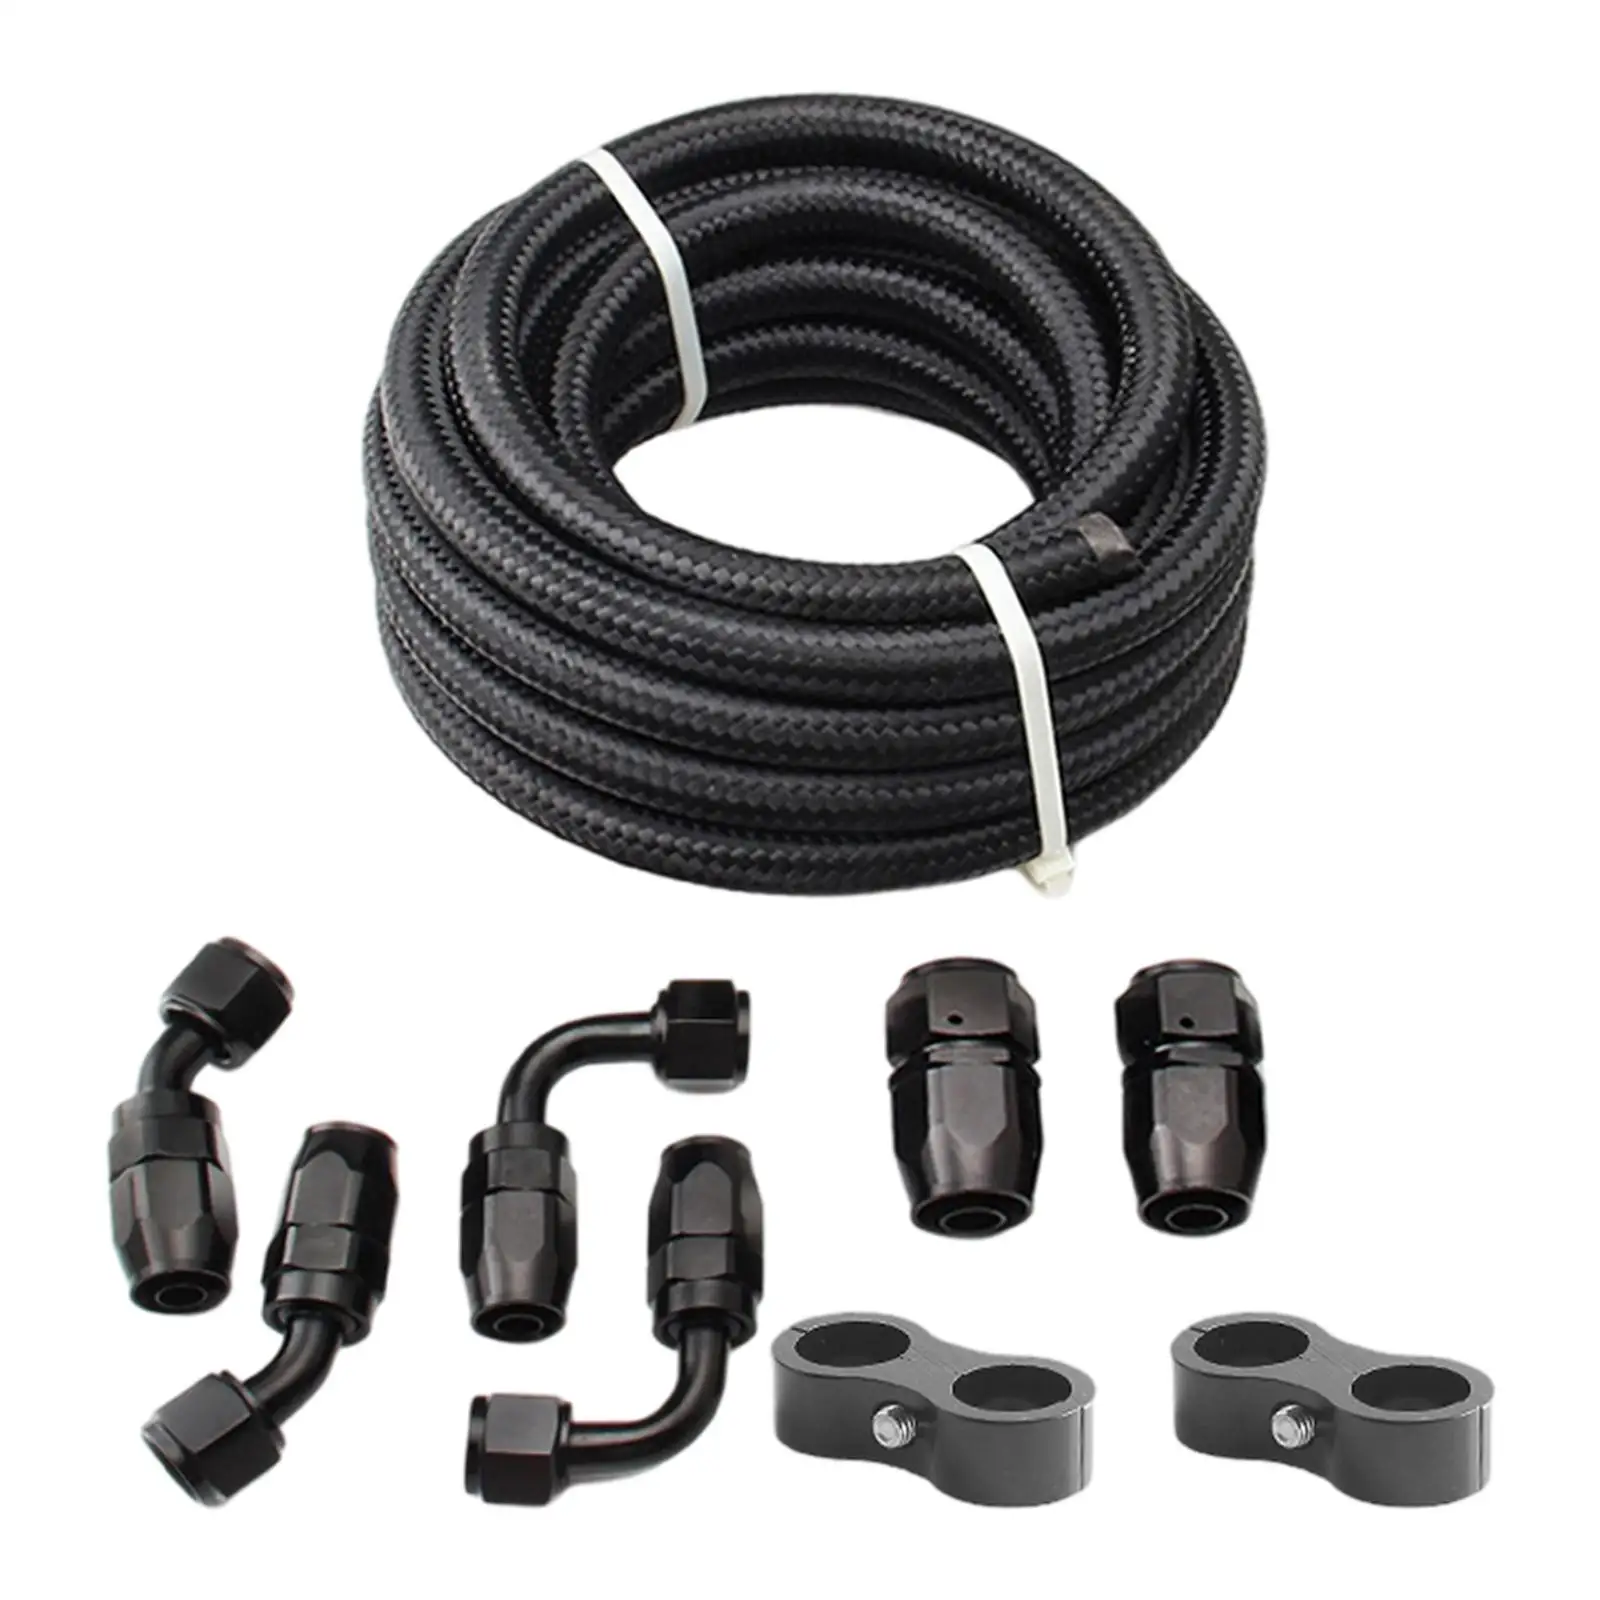 Nylon Braided Fuel Hose Set 6Pcs Swivel Hose Ends Fitting Rubber Oil Cooler Adapter Fits for Hydraulic Fluid Diesels Vacuum